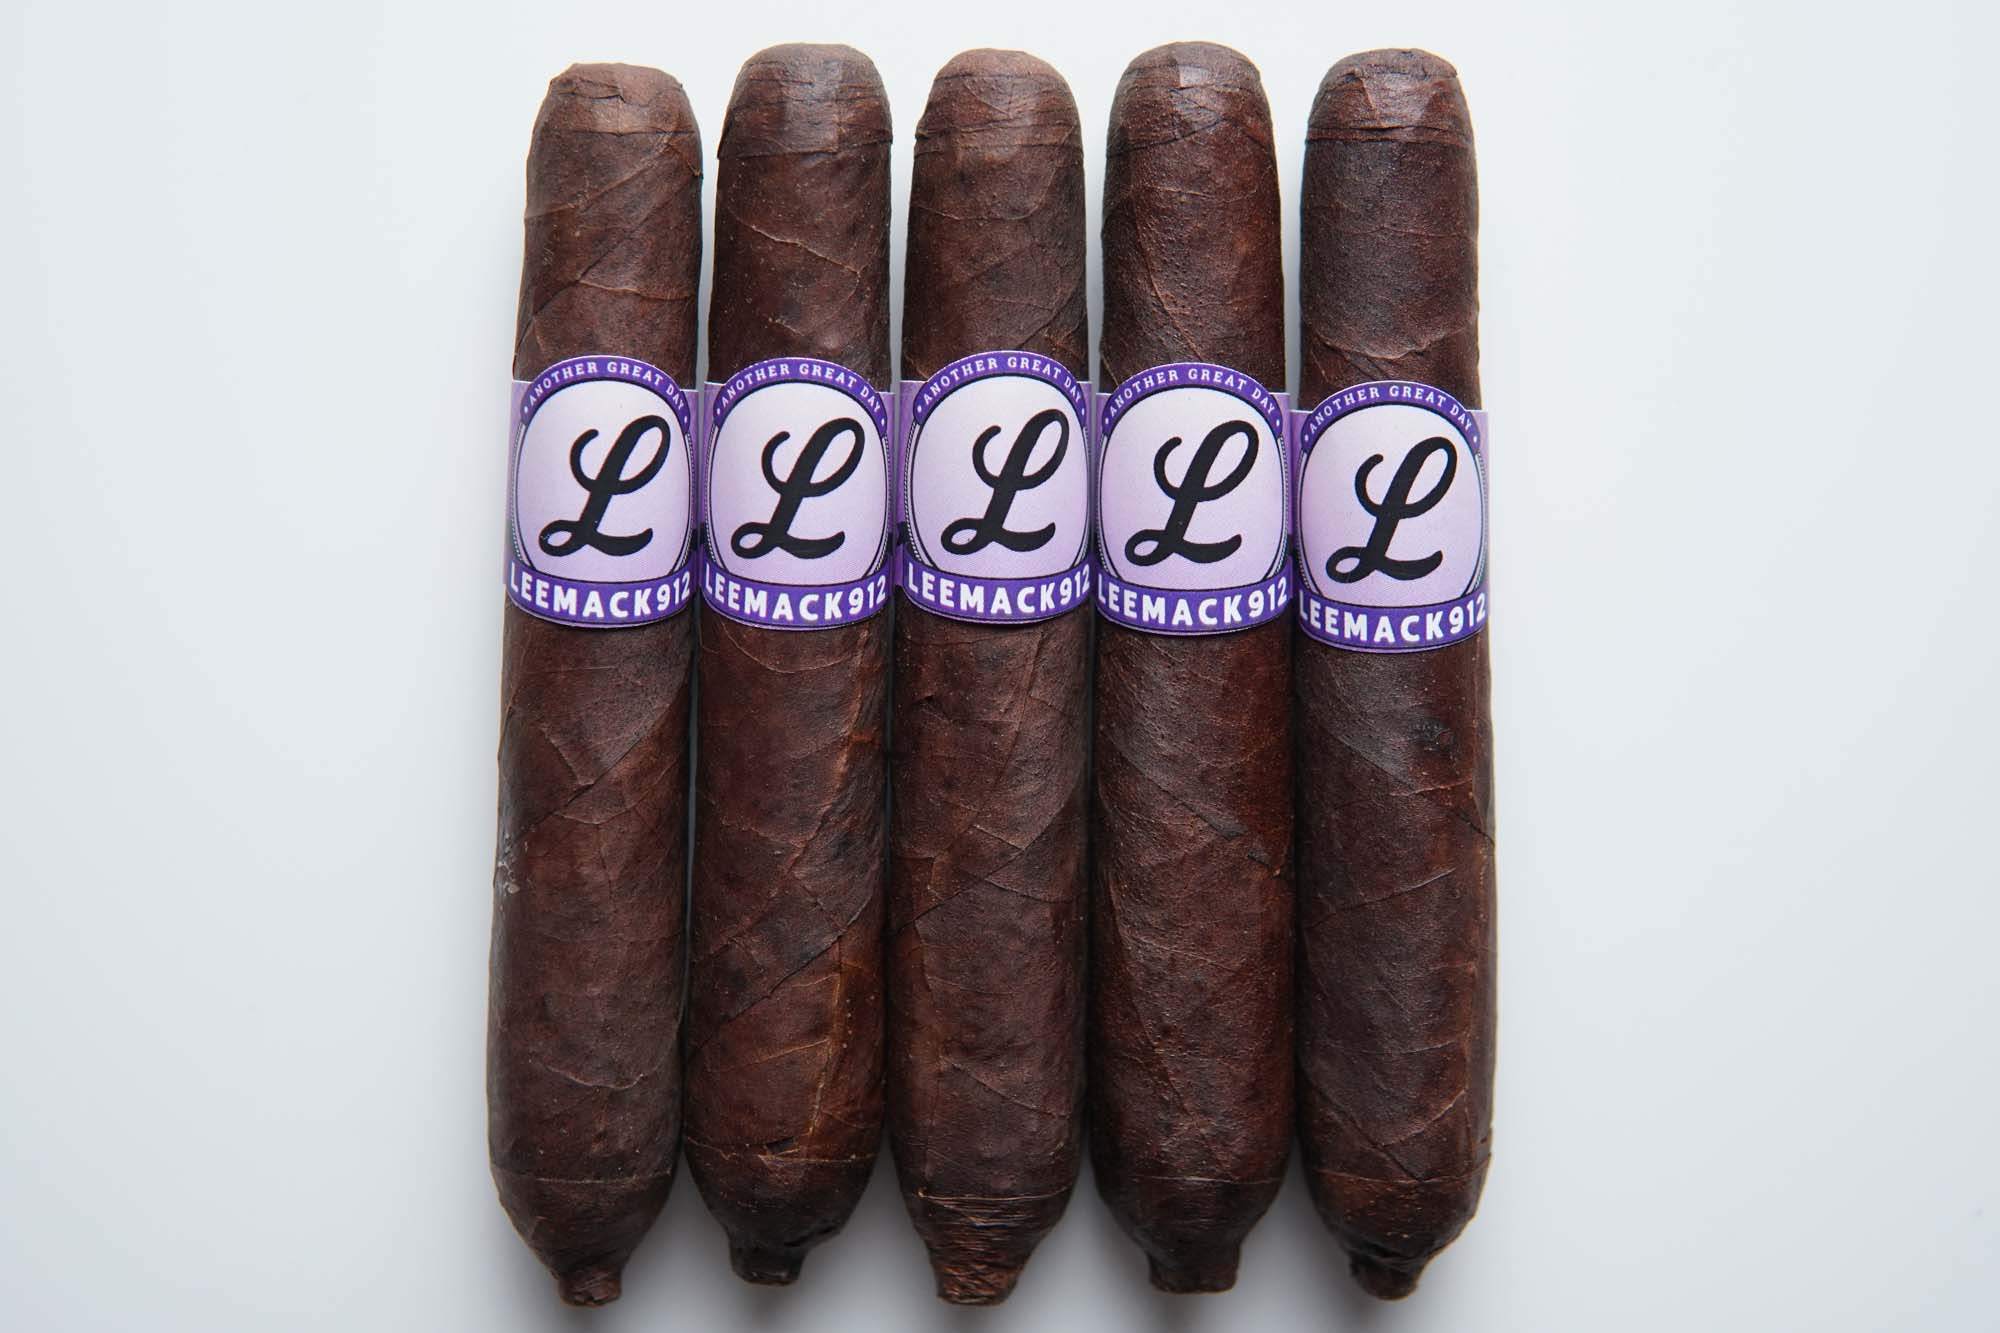 LeeMack912 Another Great Day Lil Bit 43/4×50 Perfecto Pack of 5 $40.00